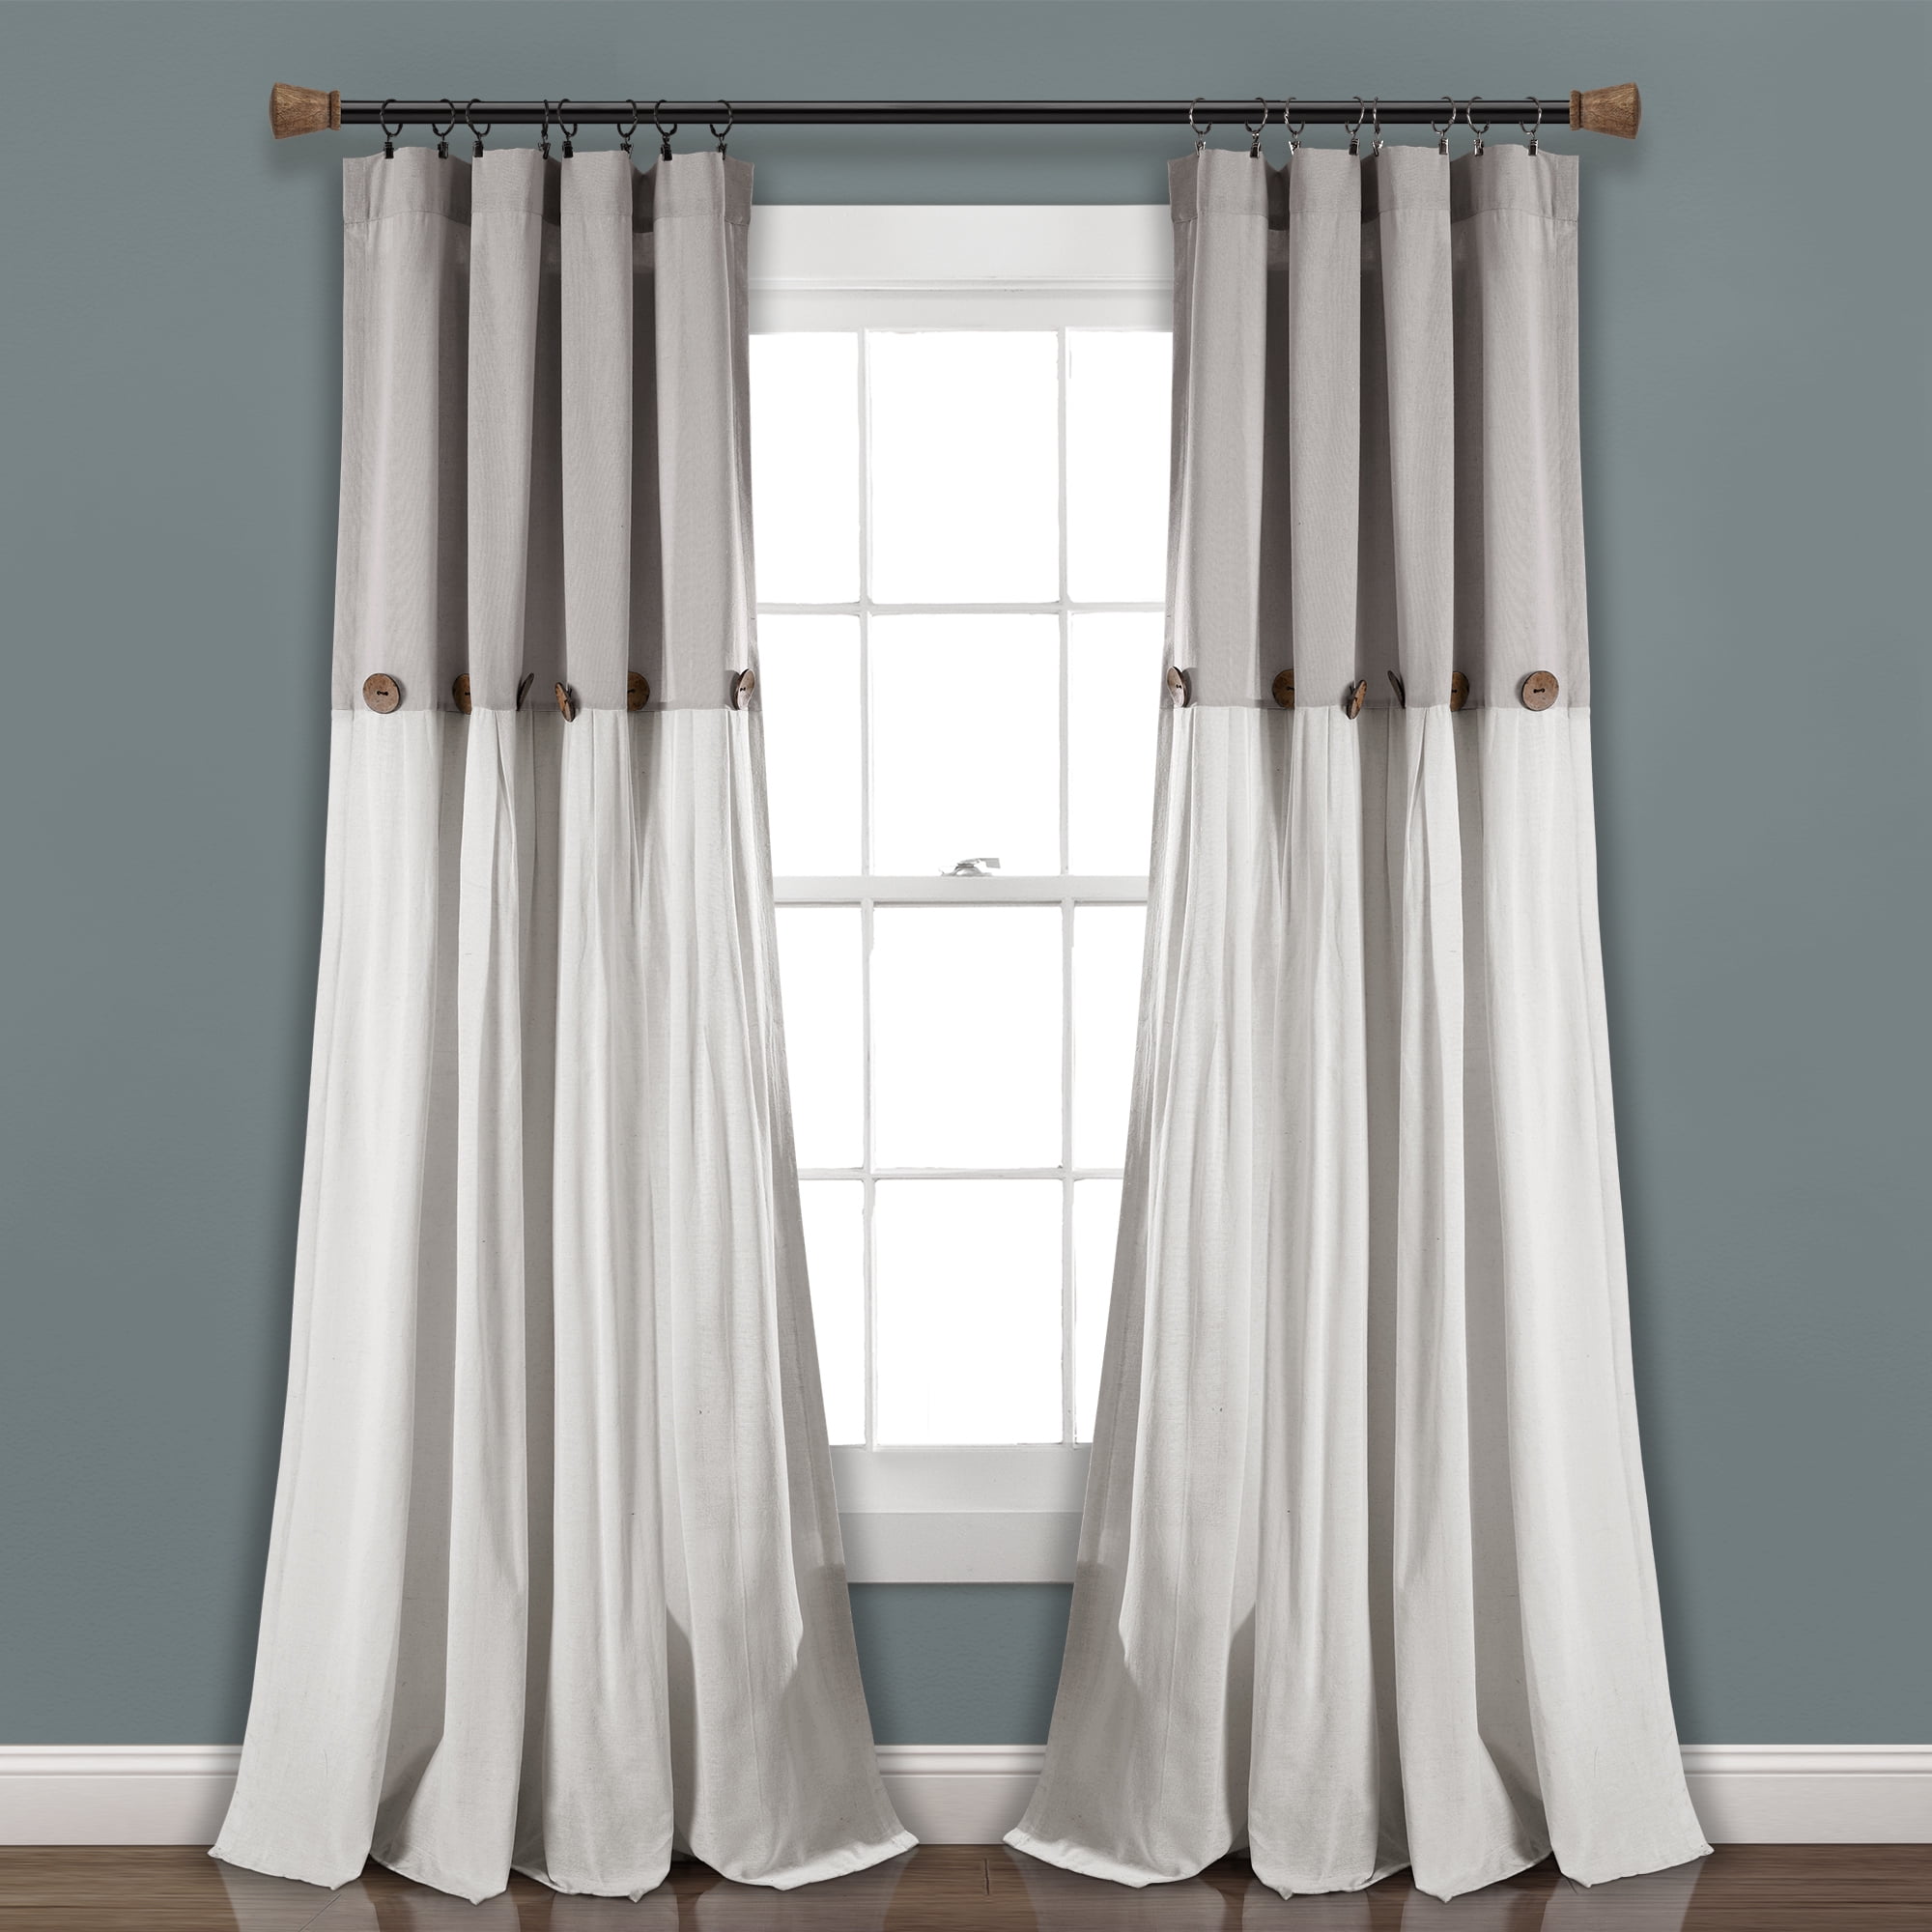 Farmhouse Curtains 63 Inch Length Native Fab Pure Slub Cotton Window Curtains 2 Panels 50x63 Curtains for Bedroom Living Room Kitchen Olive Green